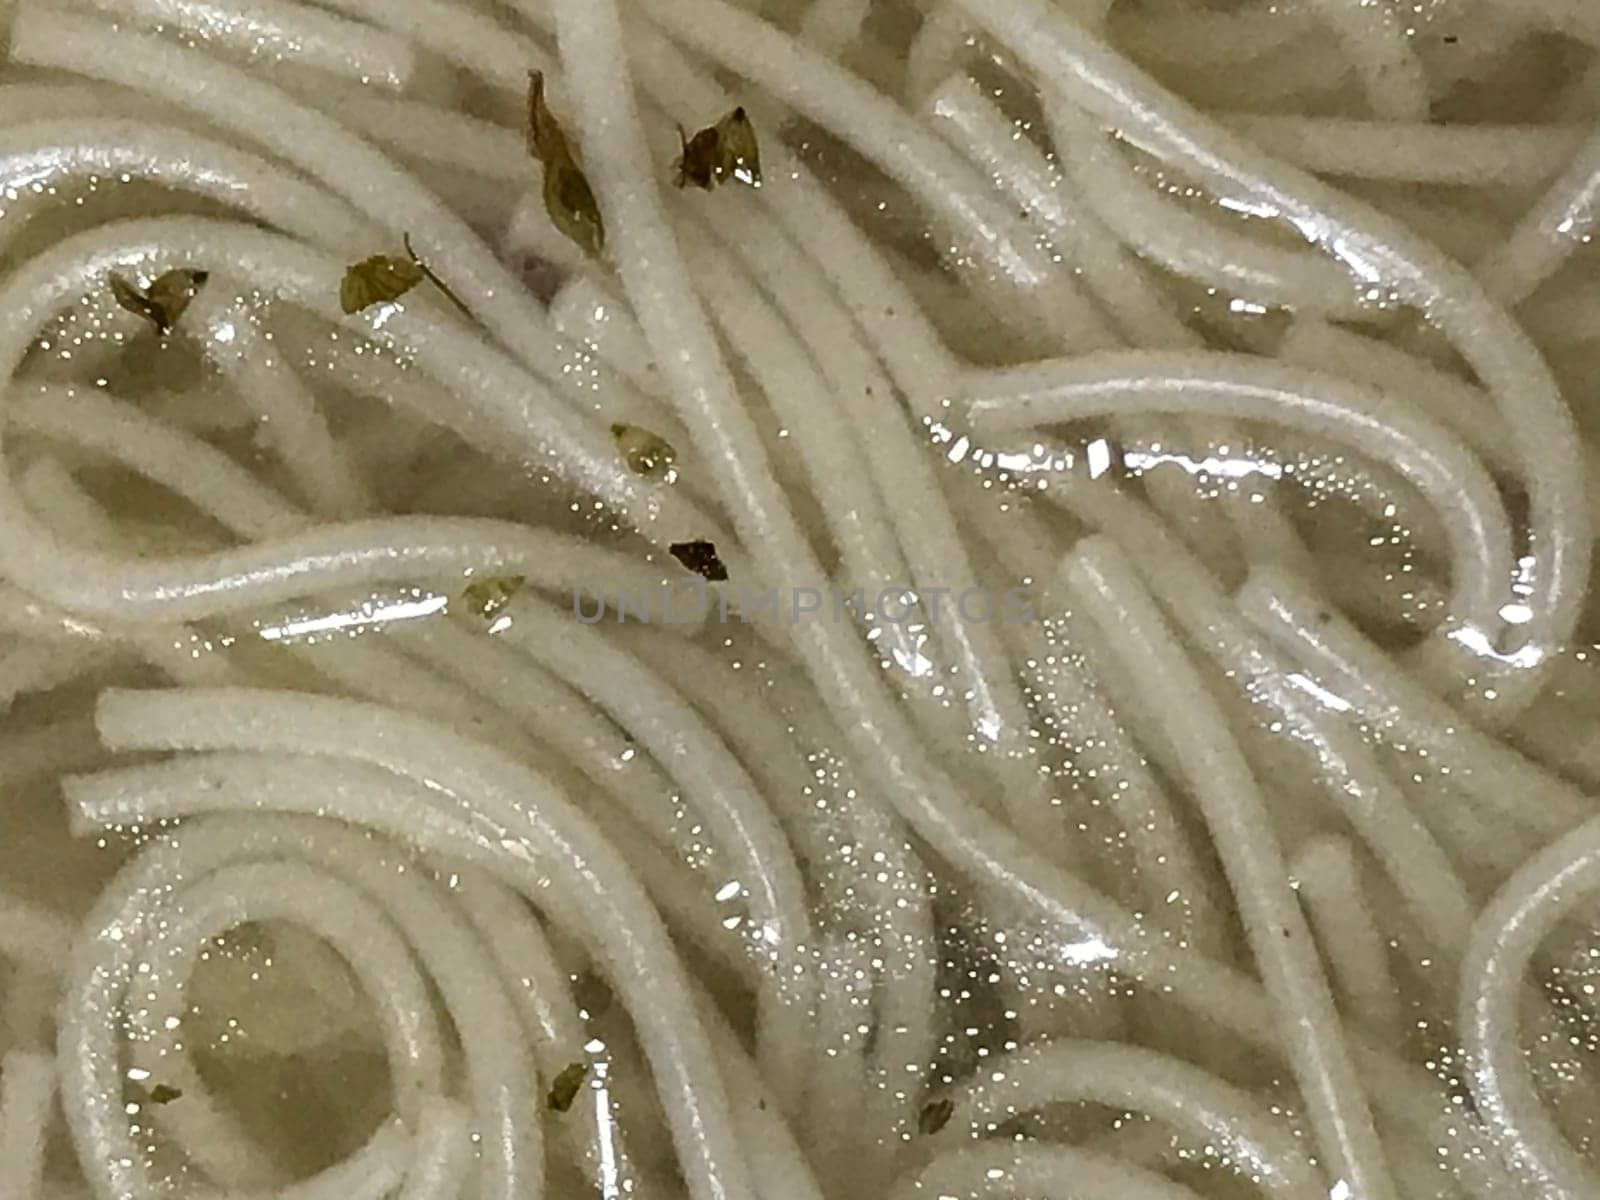 Detailed view of freshly cooked noodle strands with specks of green herbs